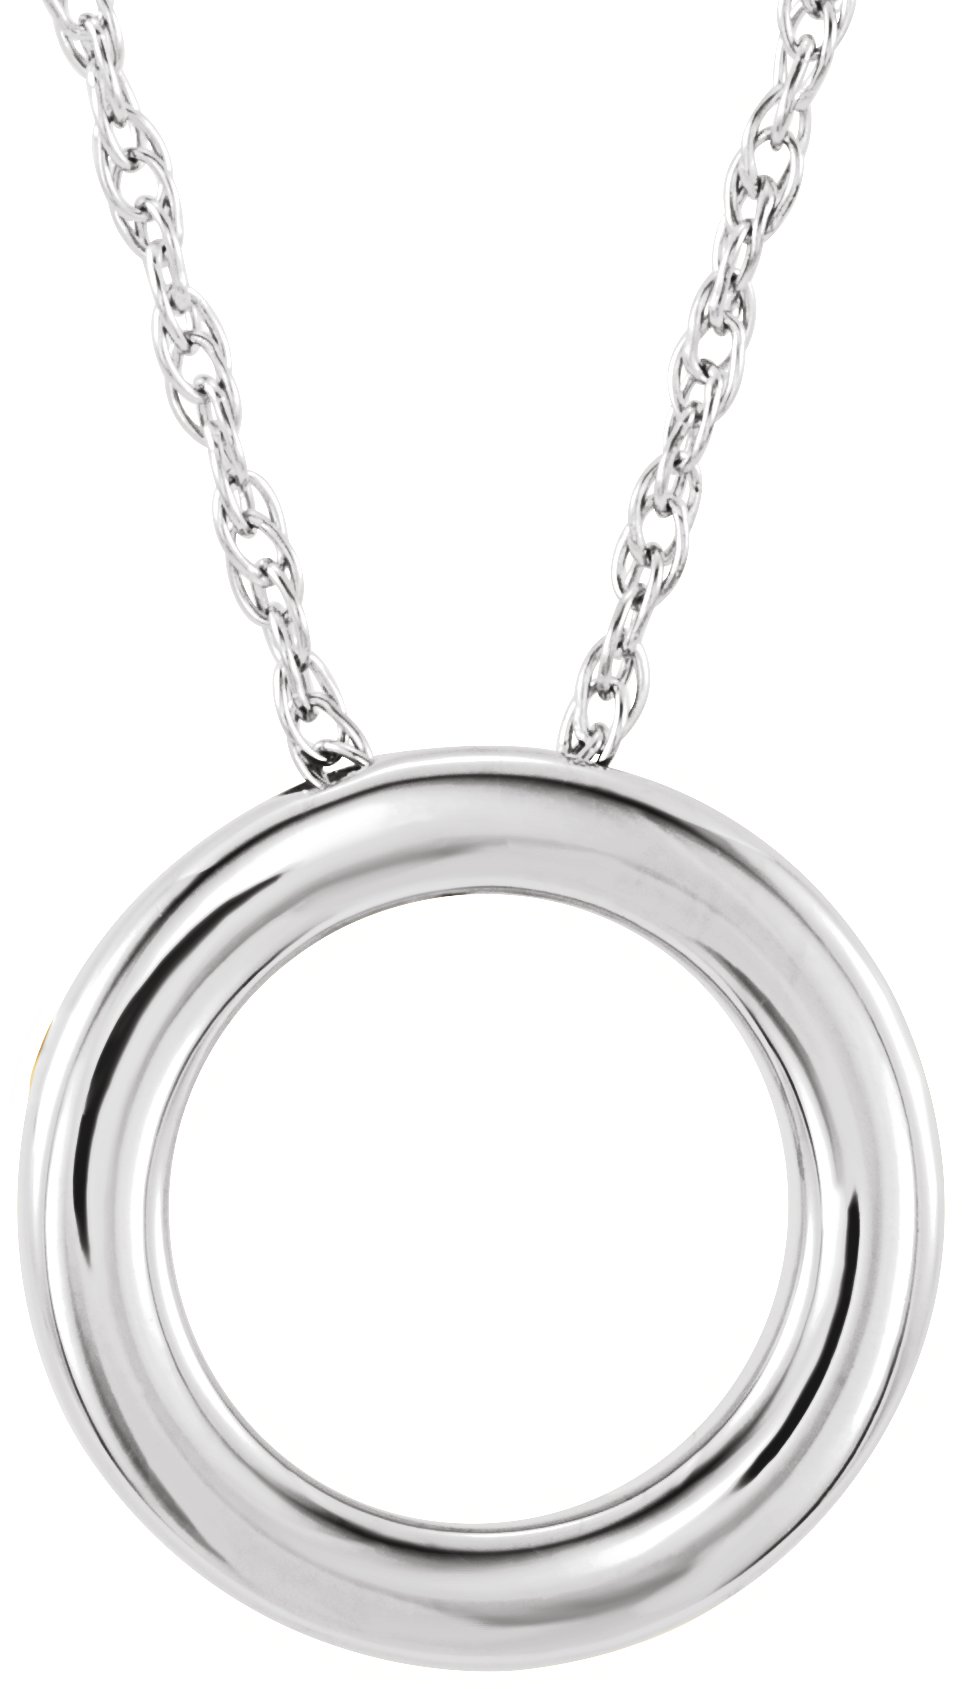 Sterling Silver 15 mm Circle 18 inch Necklace Ref. 12064613